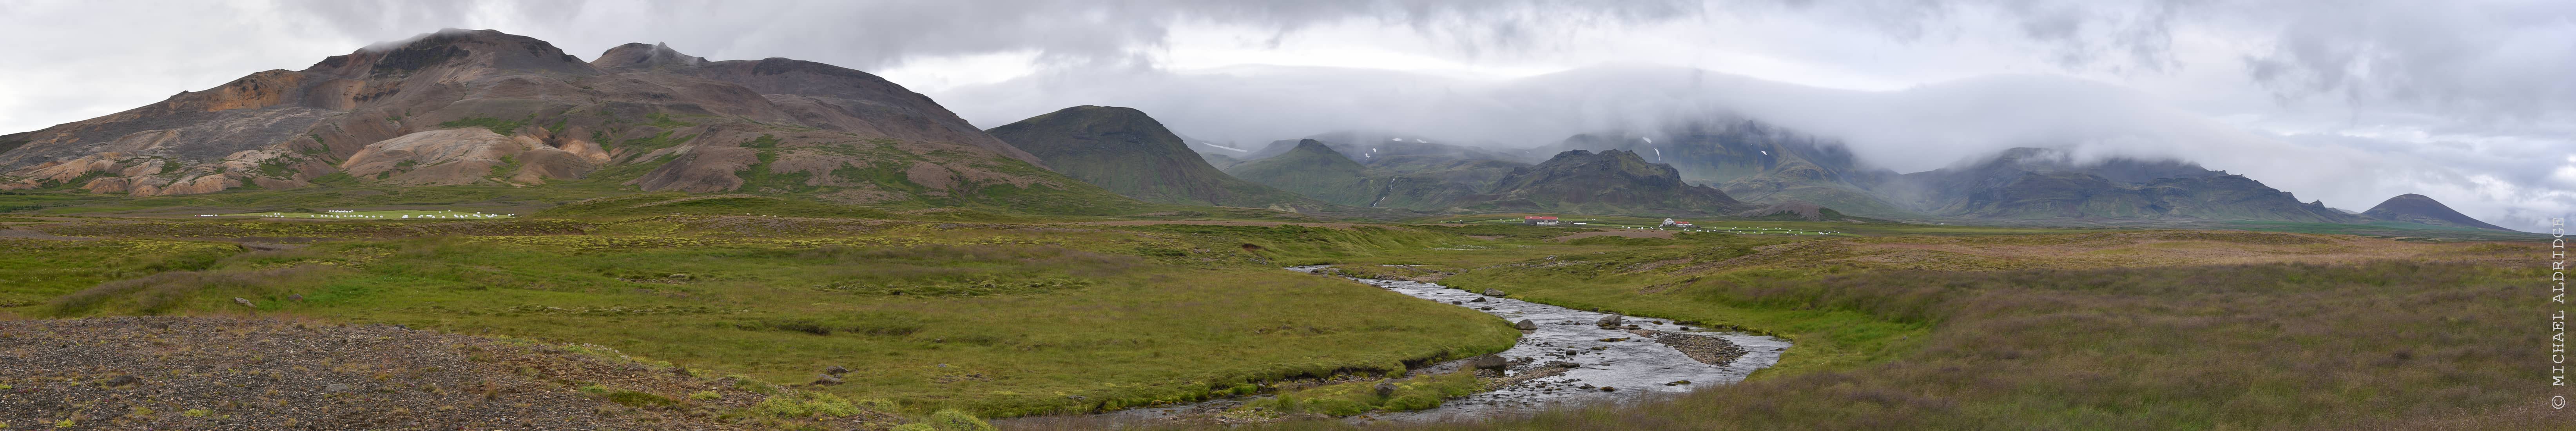 A view from Route 1, Highlands, Iceland